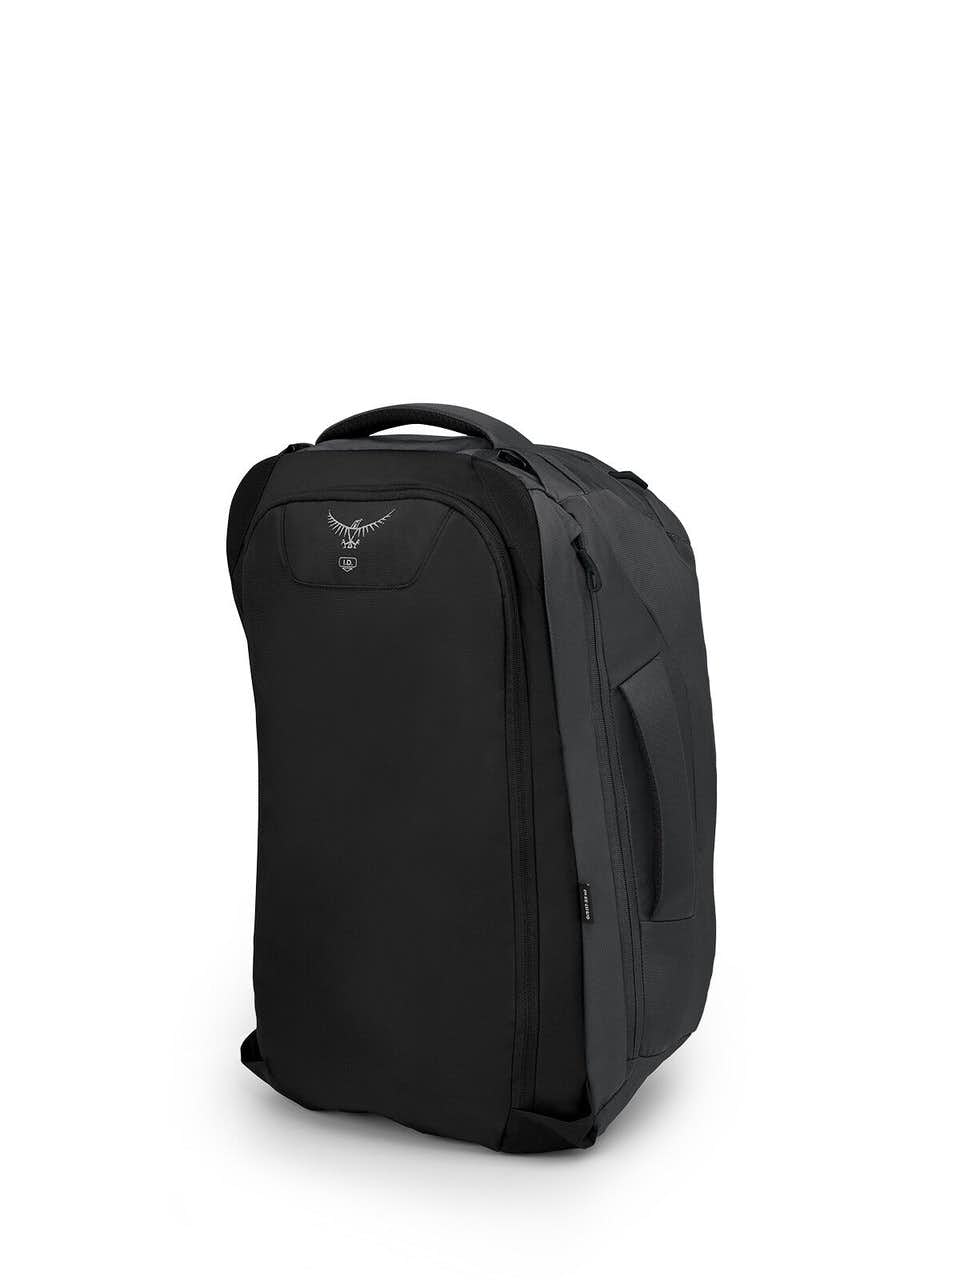 Farpoint 40 Travel Pack TUNNEL VISION GREY